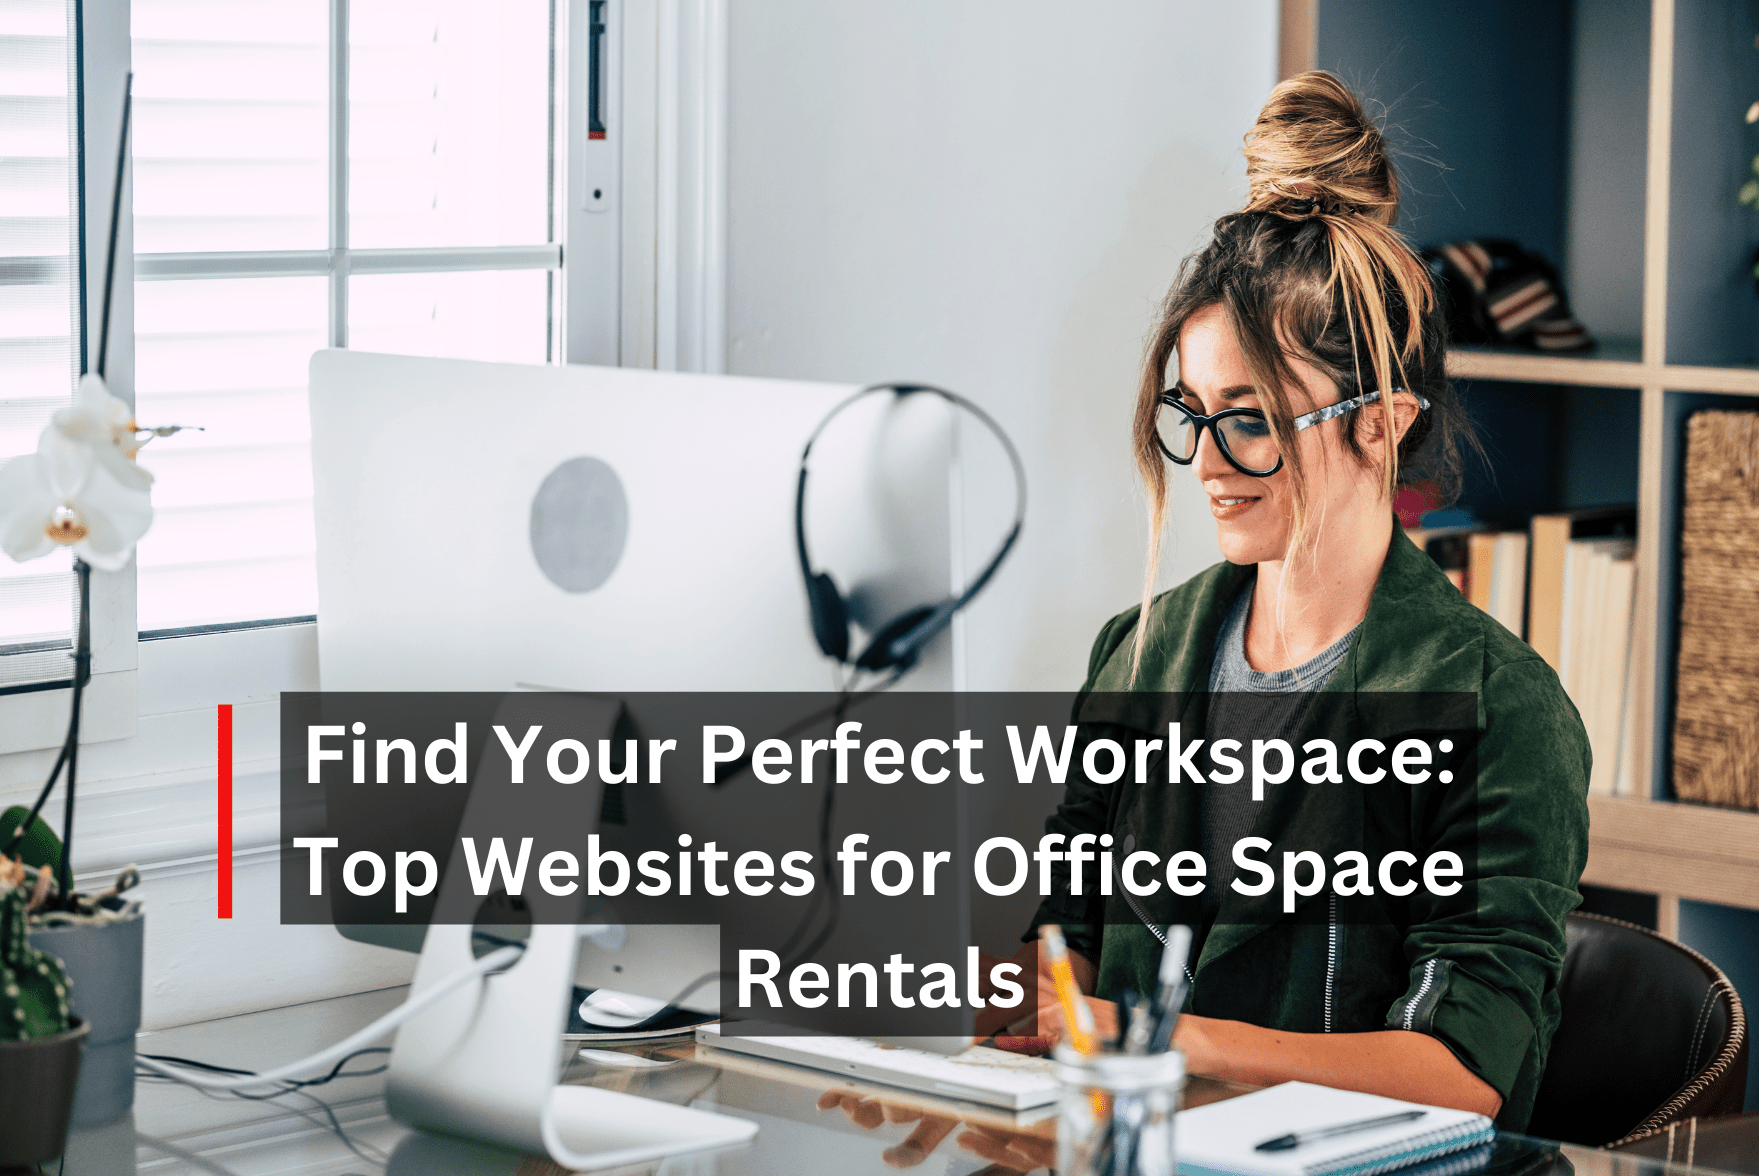 Find Your Perfect Workspace: Top Websites for Office Space Rentals 